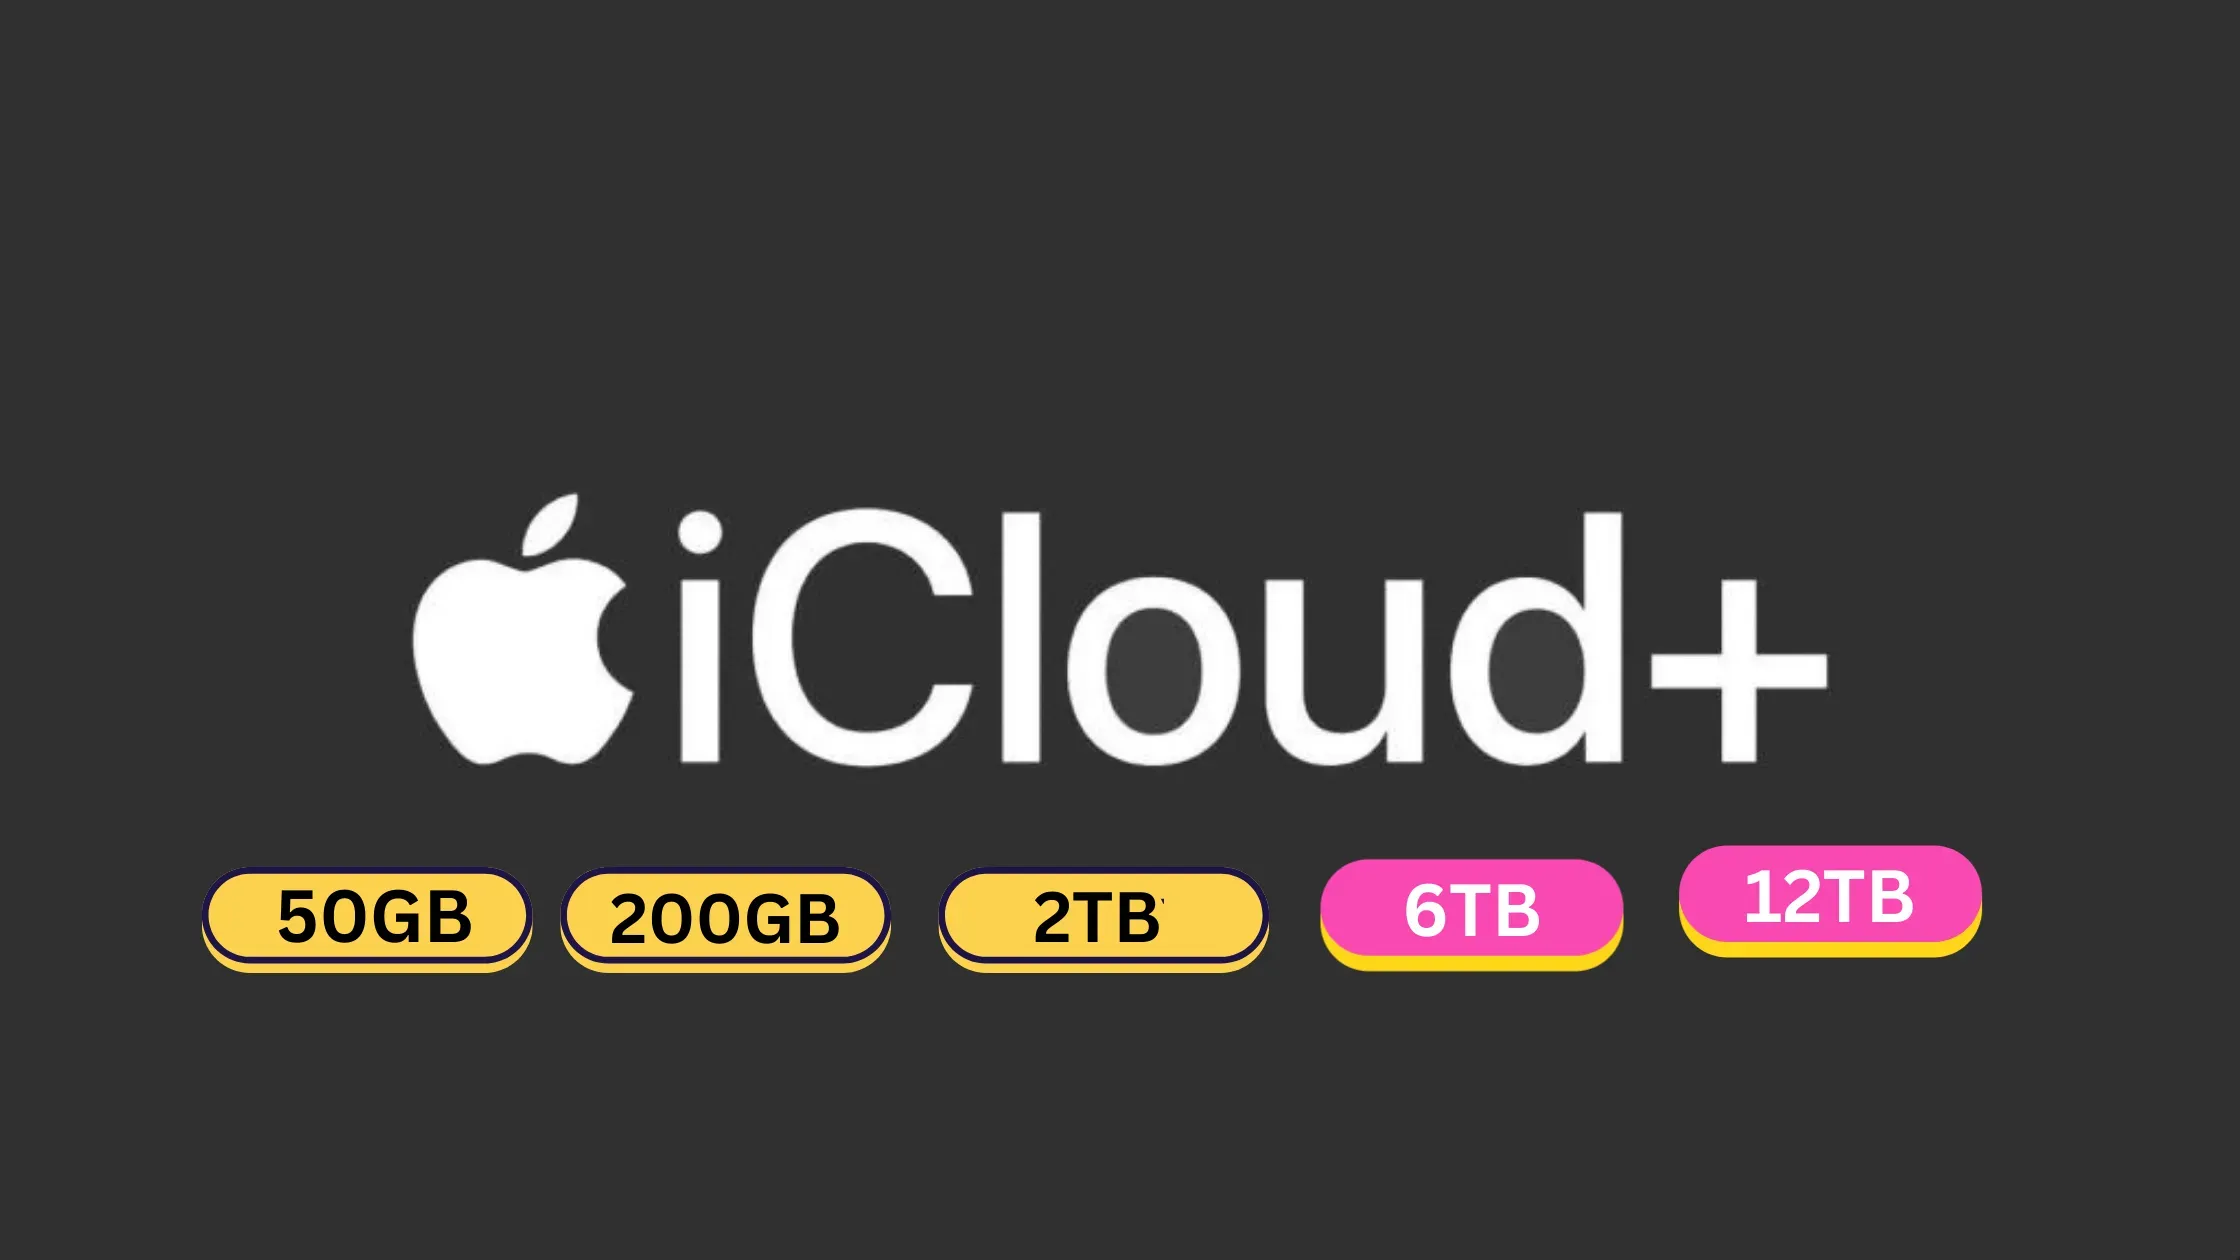 iCloud+ Plans with 6TB and 12TB Storage